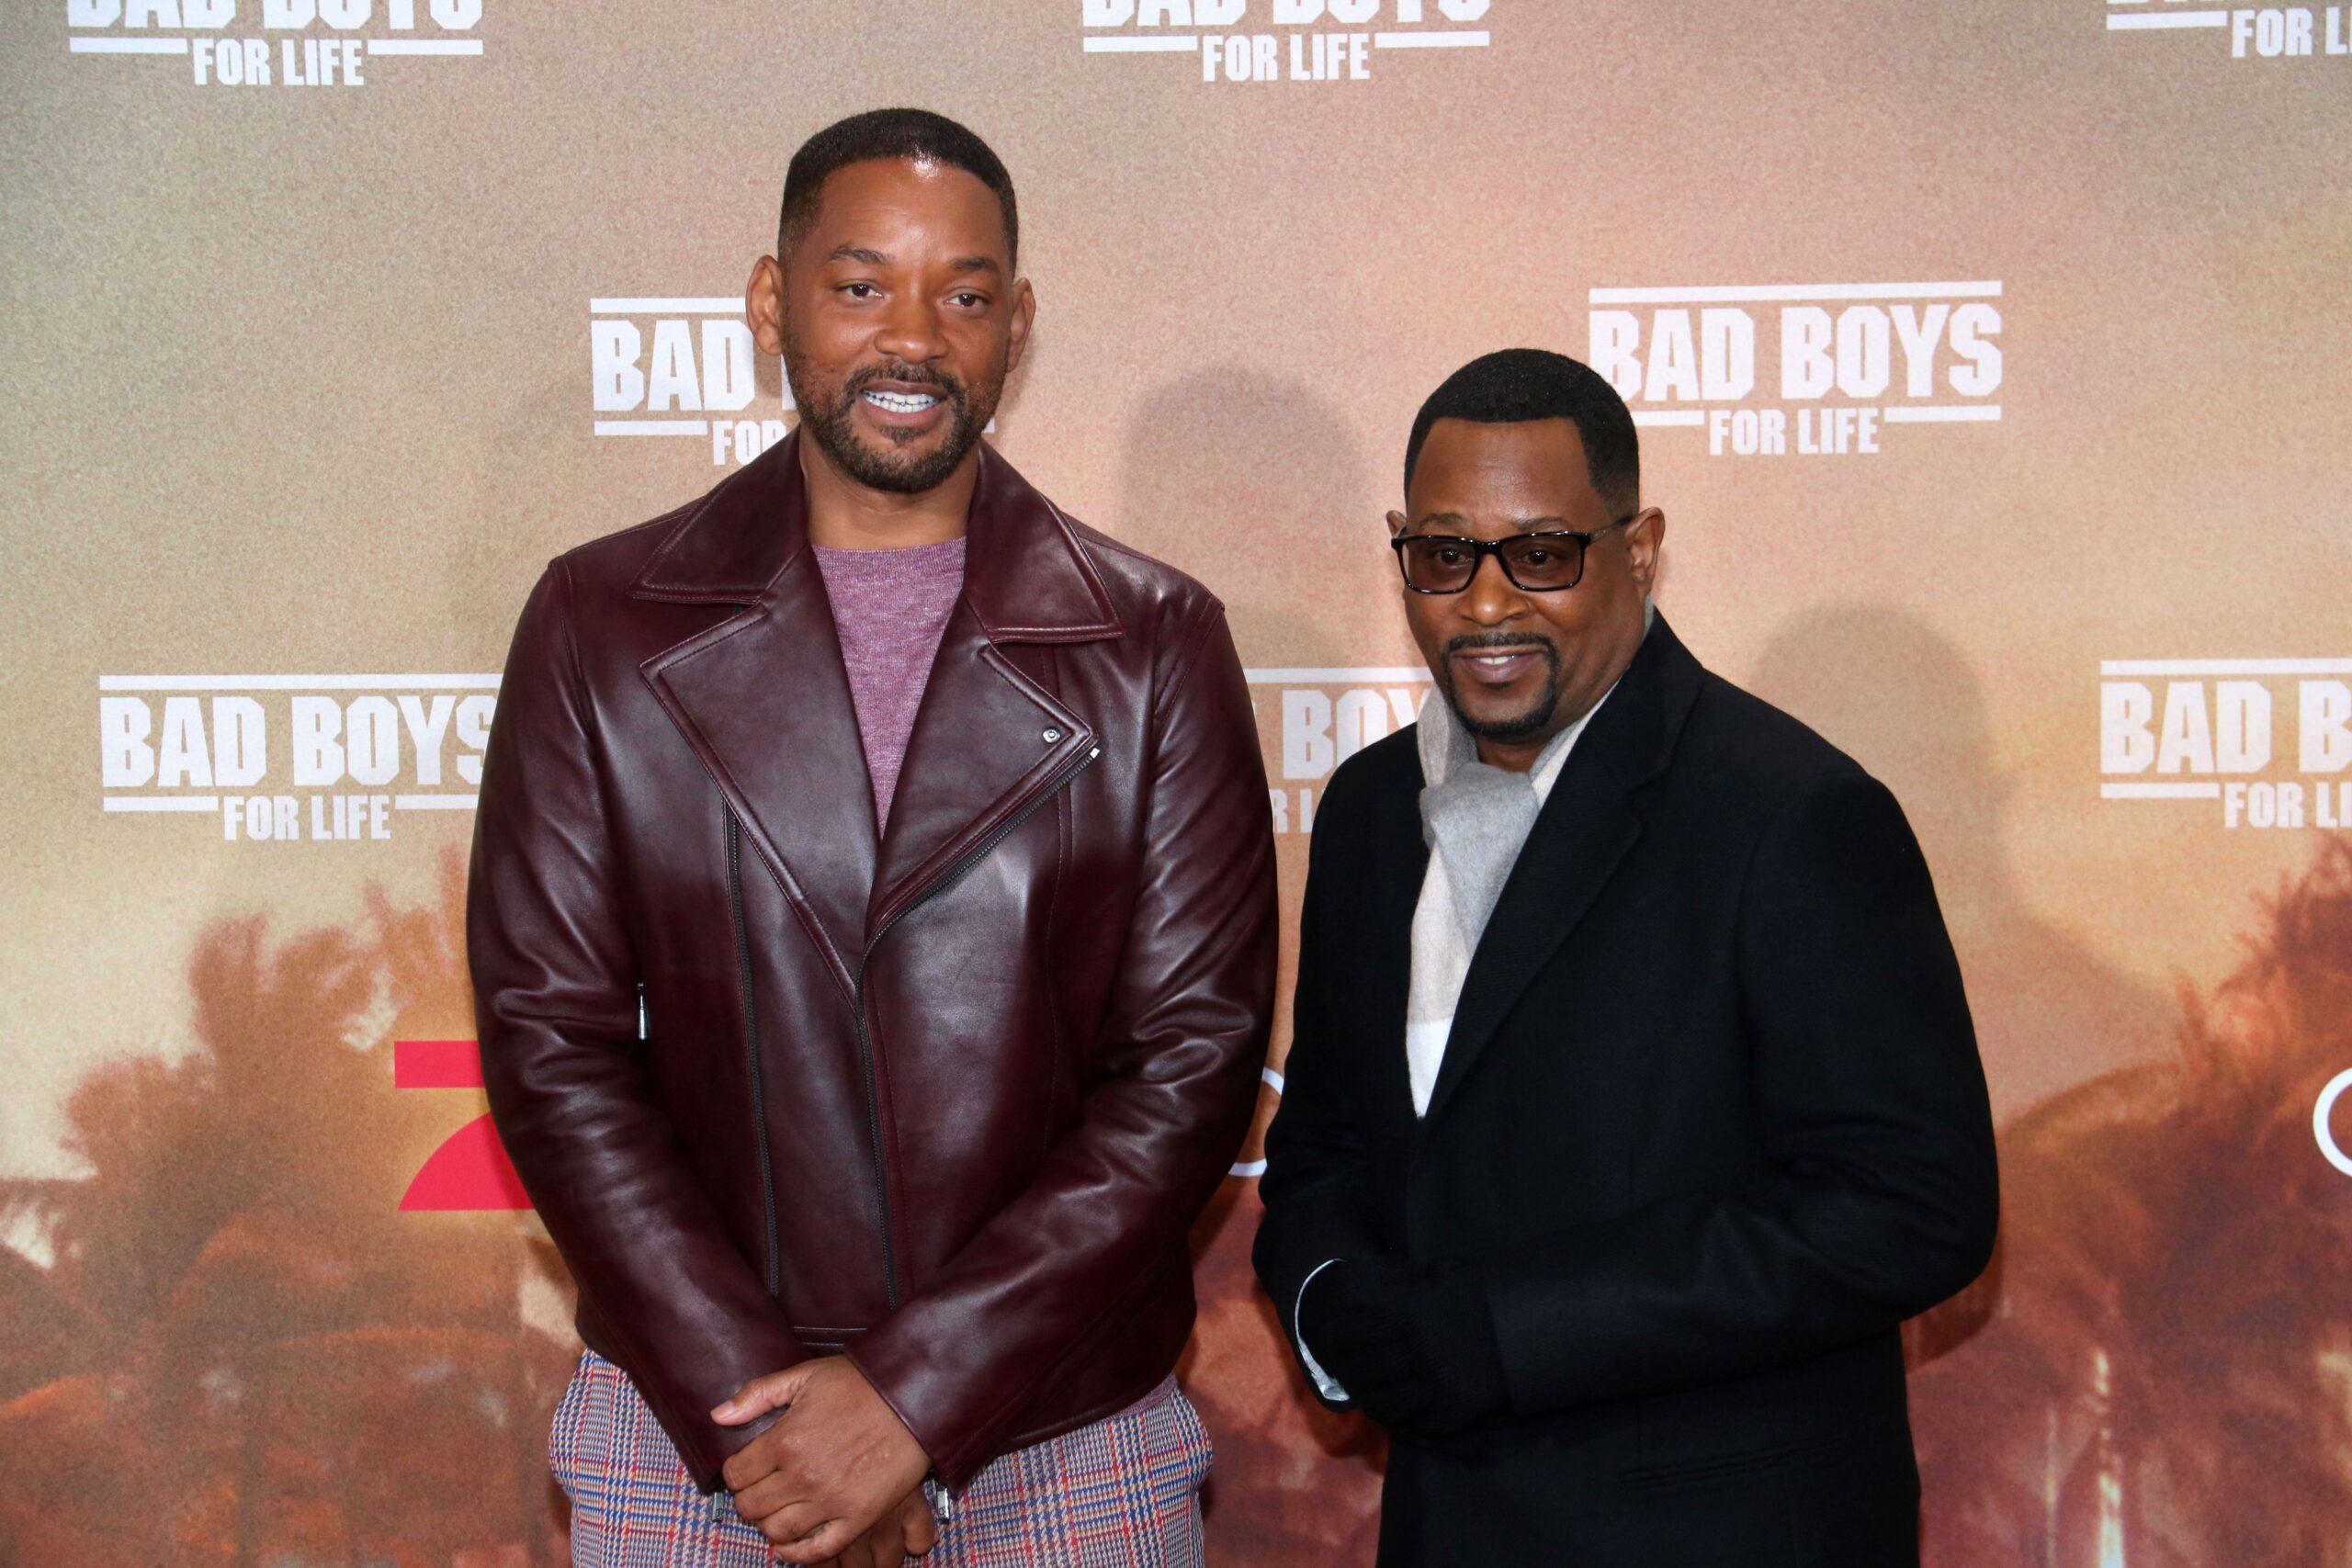 Will Smith and Martin Lawrence at "Bad Boys For Life" Premiere In Berlin, Germany